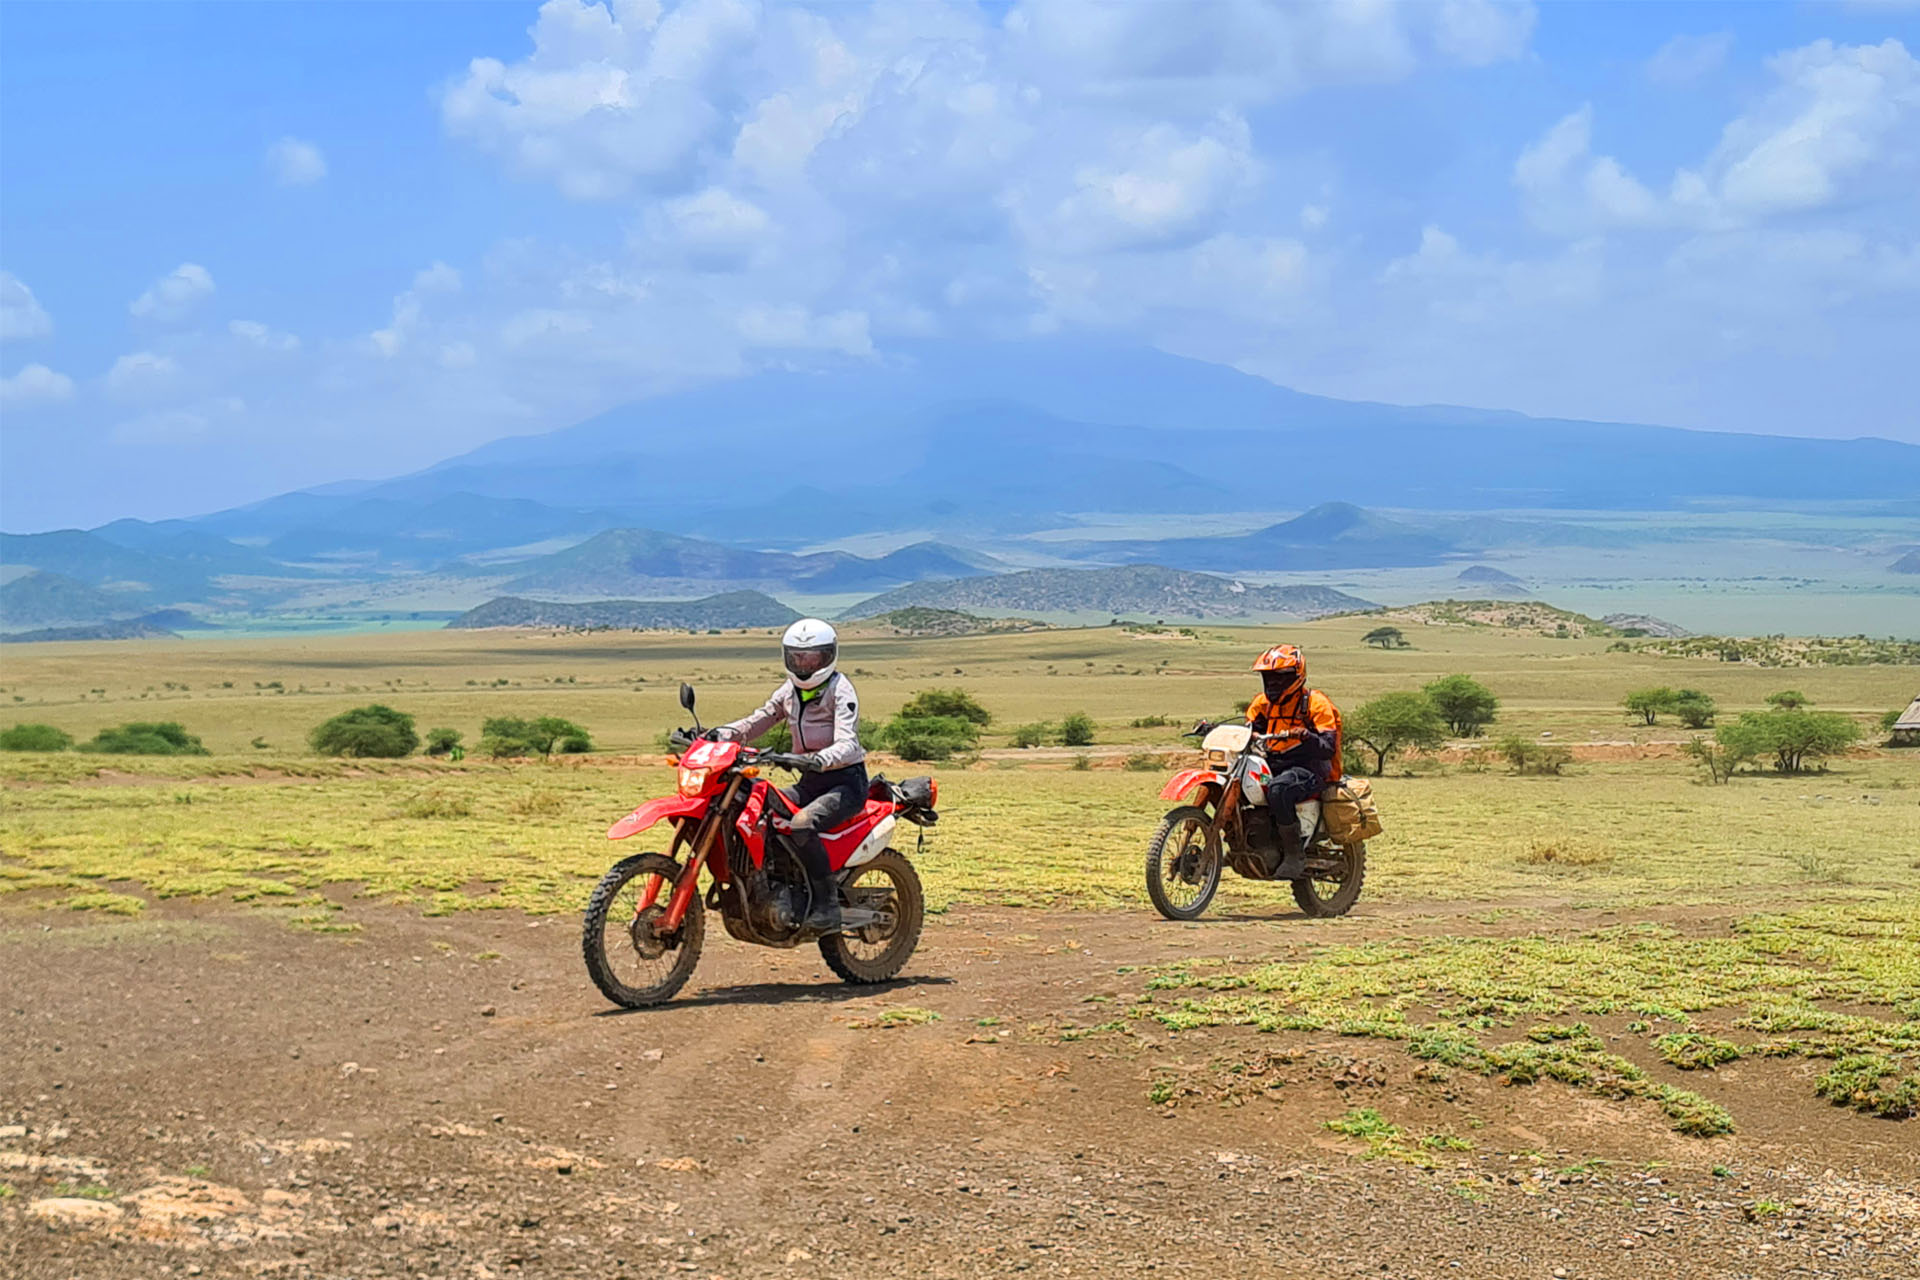 Tanzania Africa offroad motorcycle tour